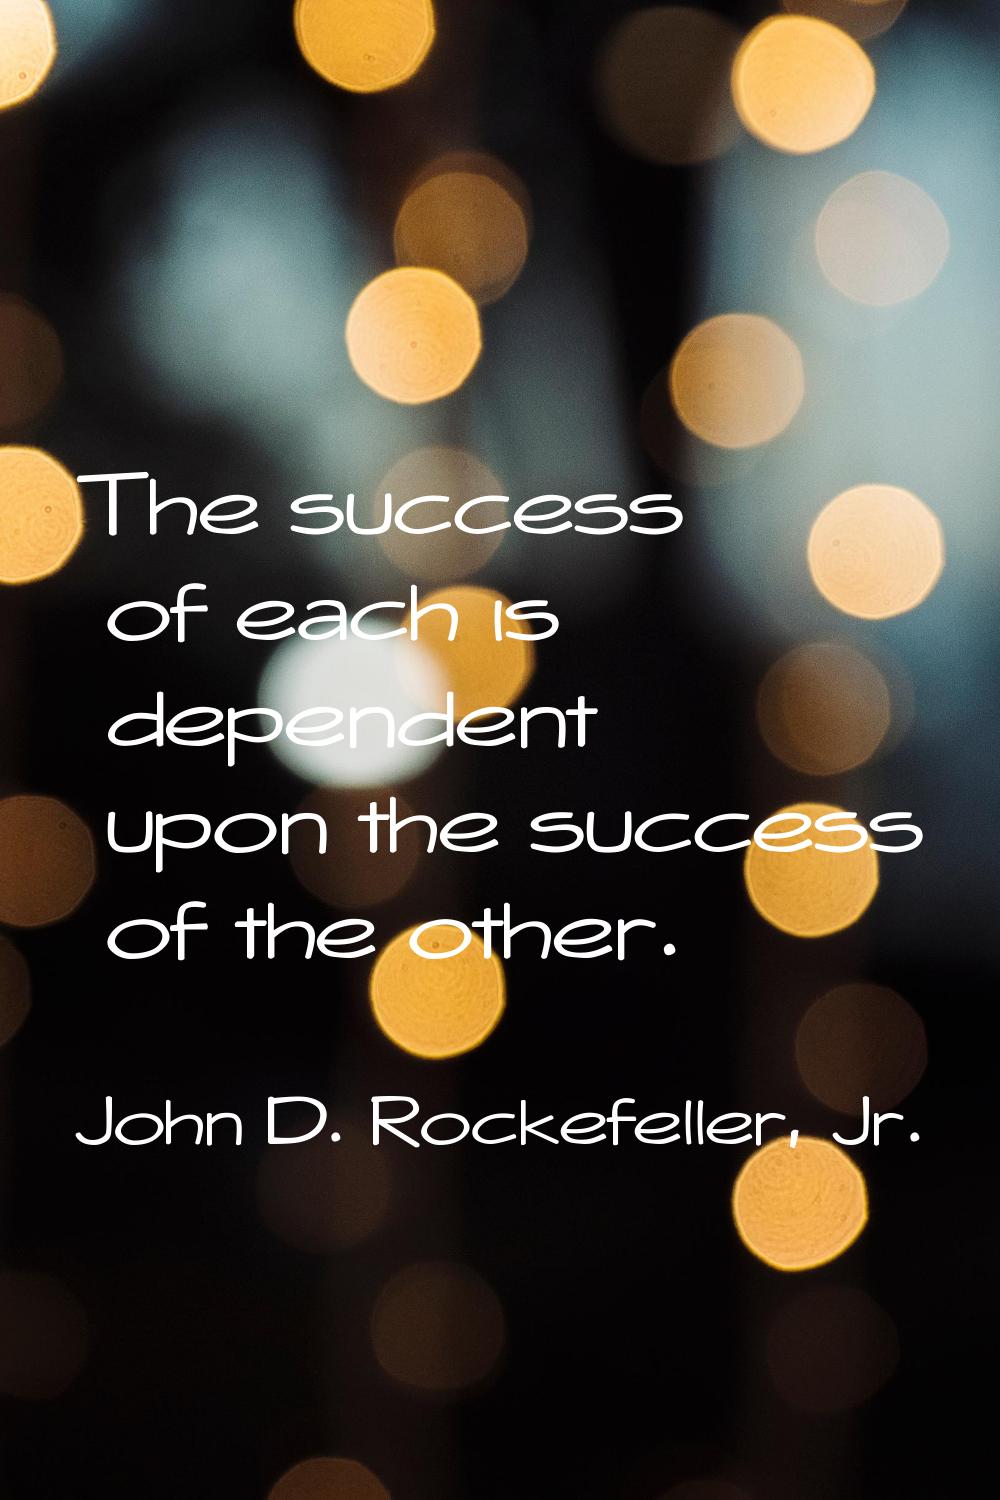 The success of each is dependent upon the success of the other.